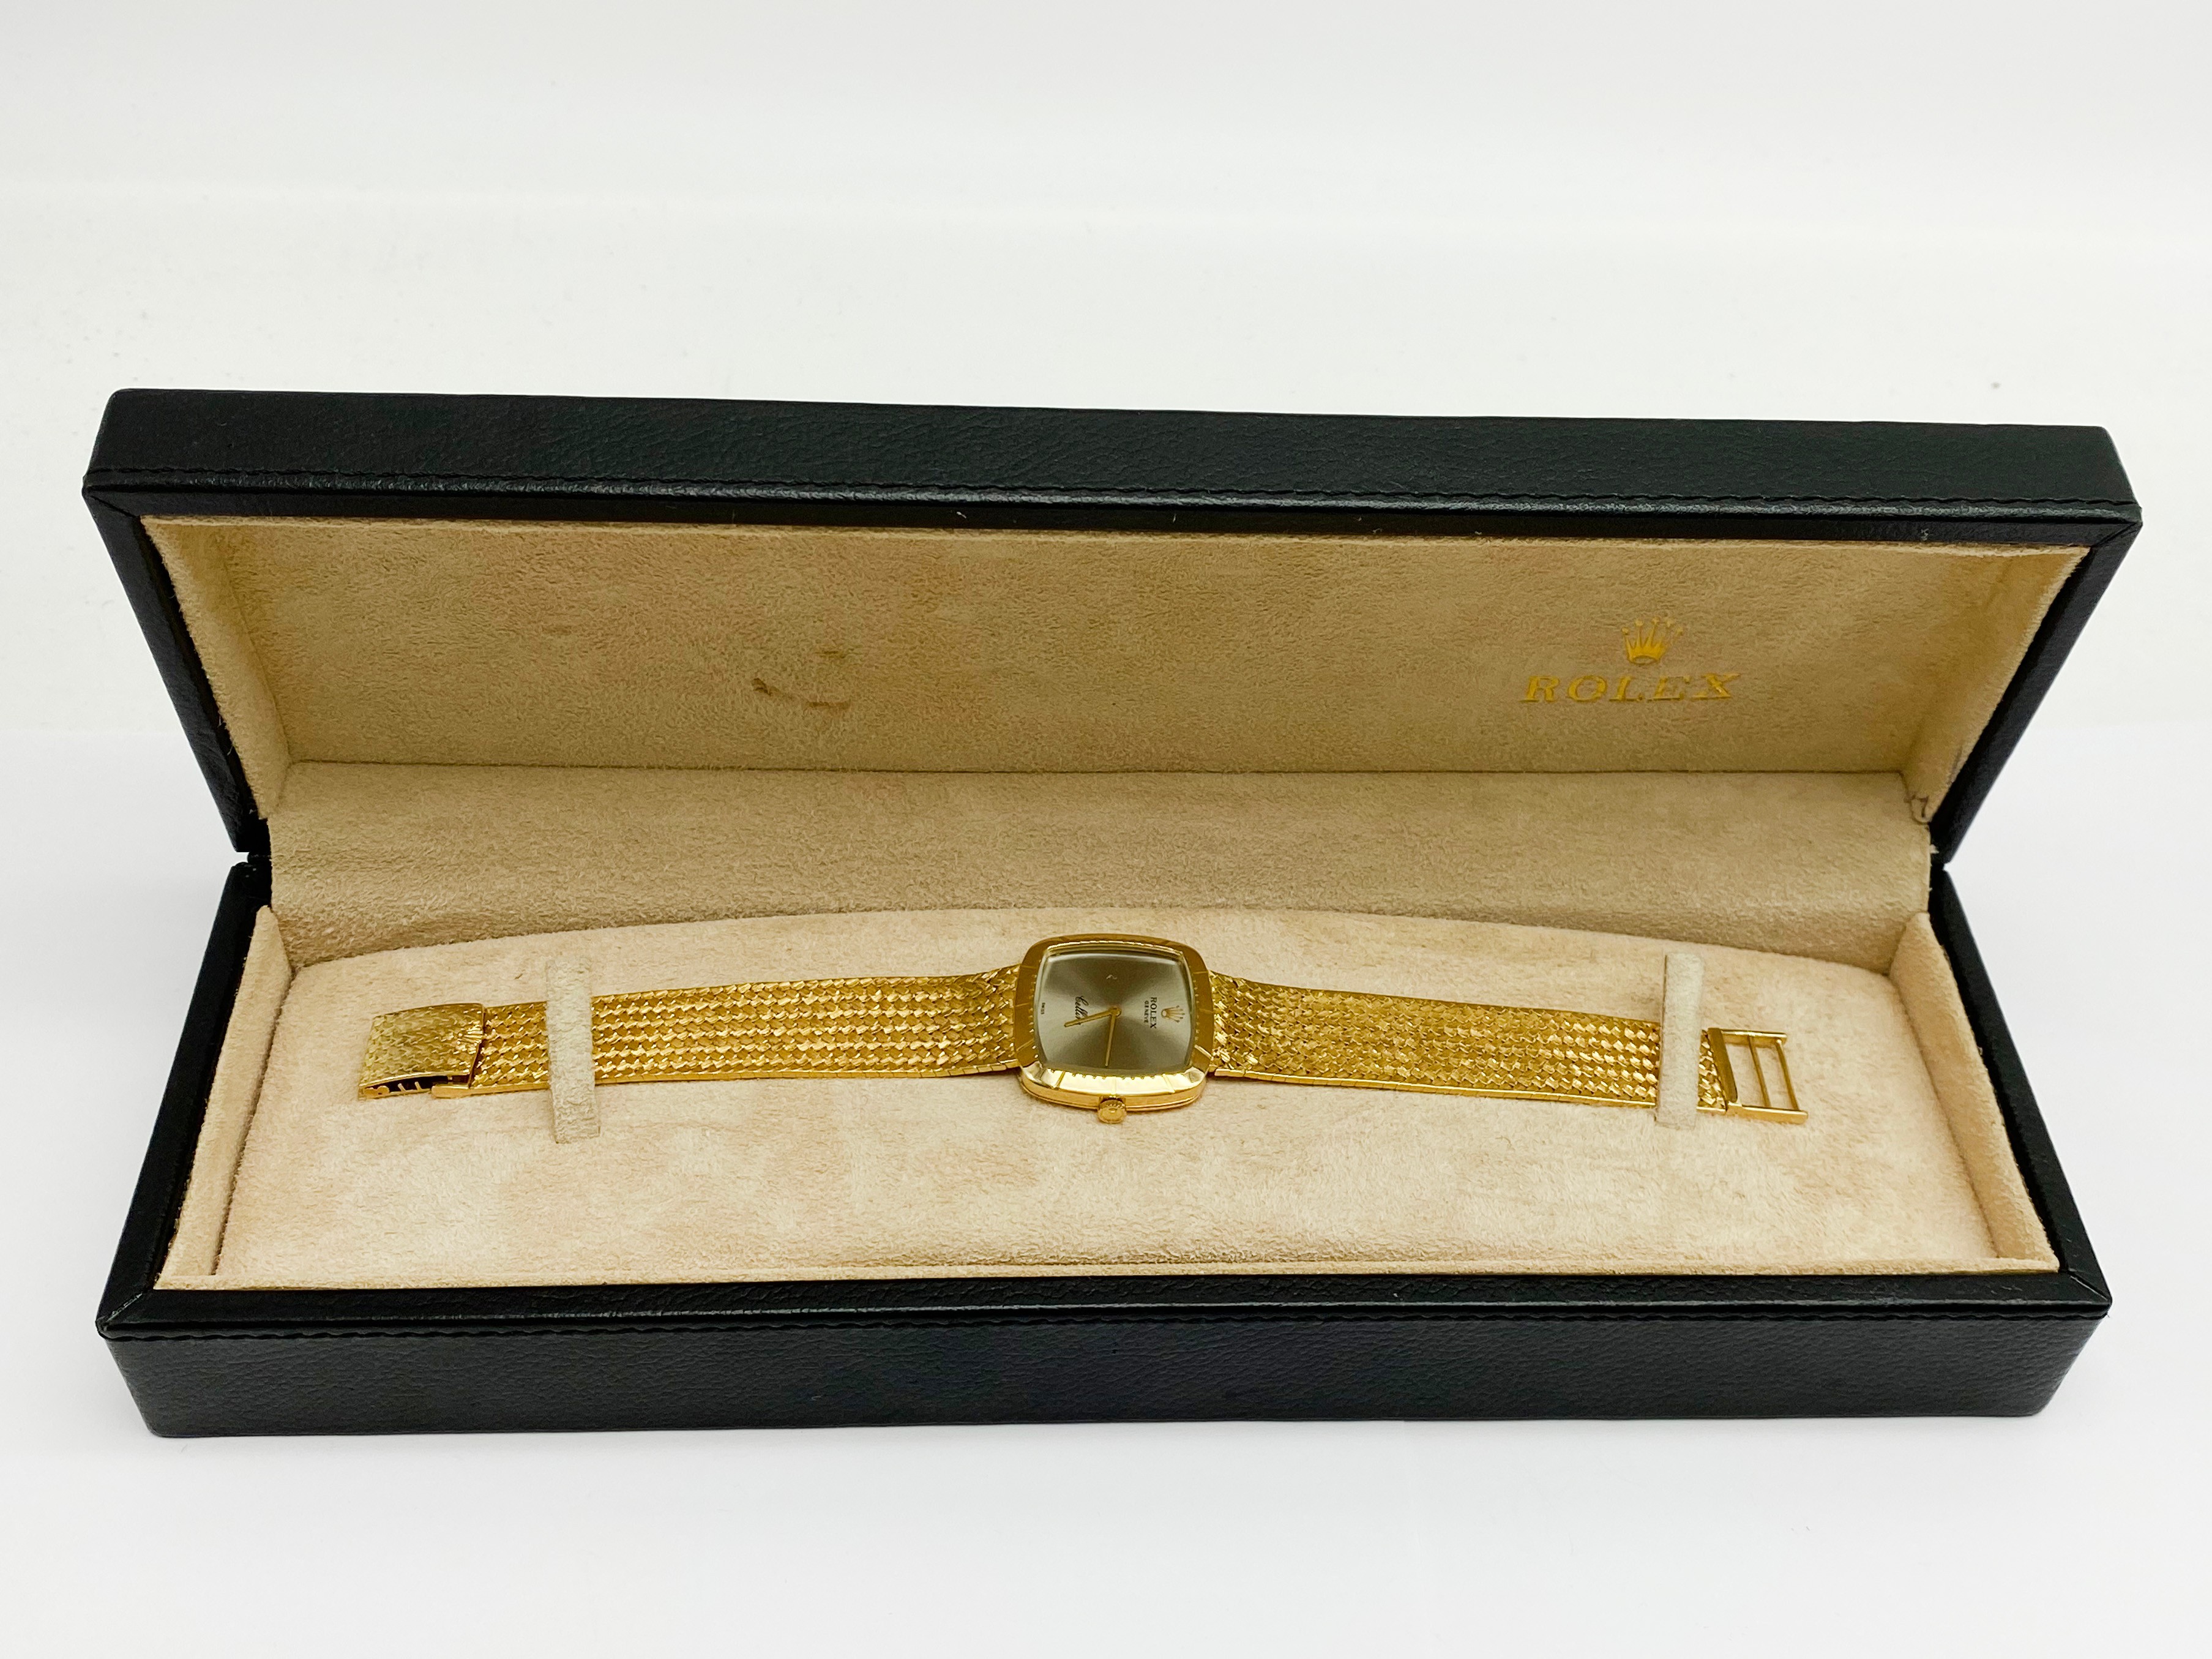 18 CARAT GOLD GENTS ROLEX CELLINI WATCH EXCELLENT CONDITION WORKING ORDER - Image 3 of 6